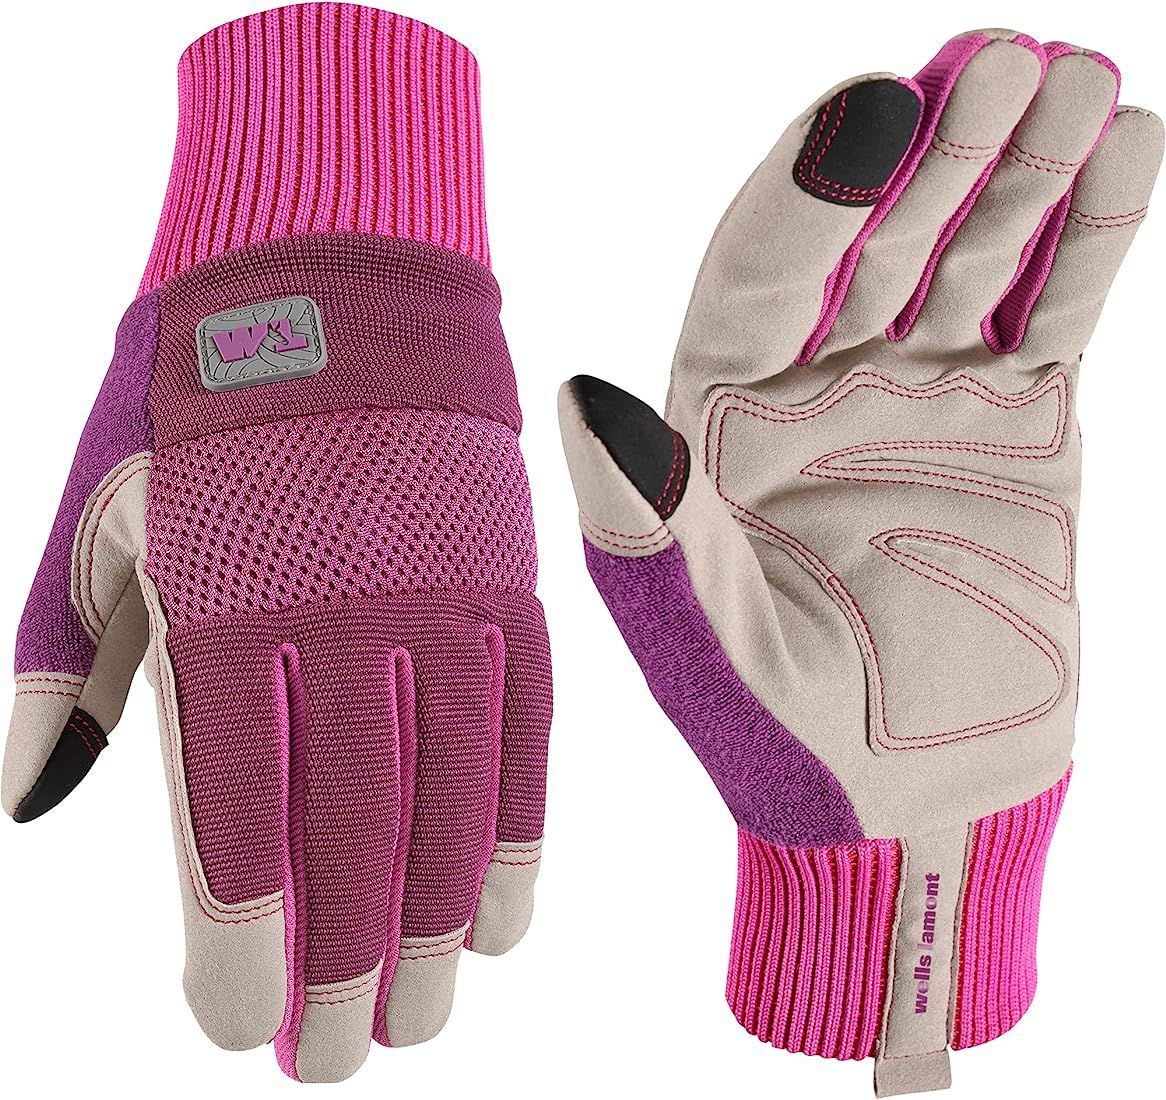 Wells Lamont Women's High Dexterity Breathable 3D Mesh Work and Gardening Gloves, Pink (7764) | Amazon (US)